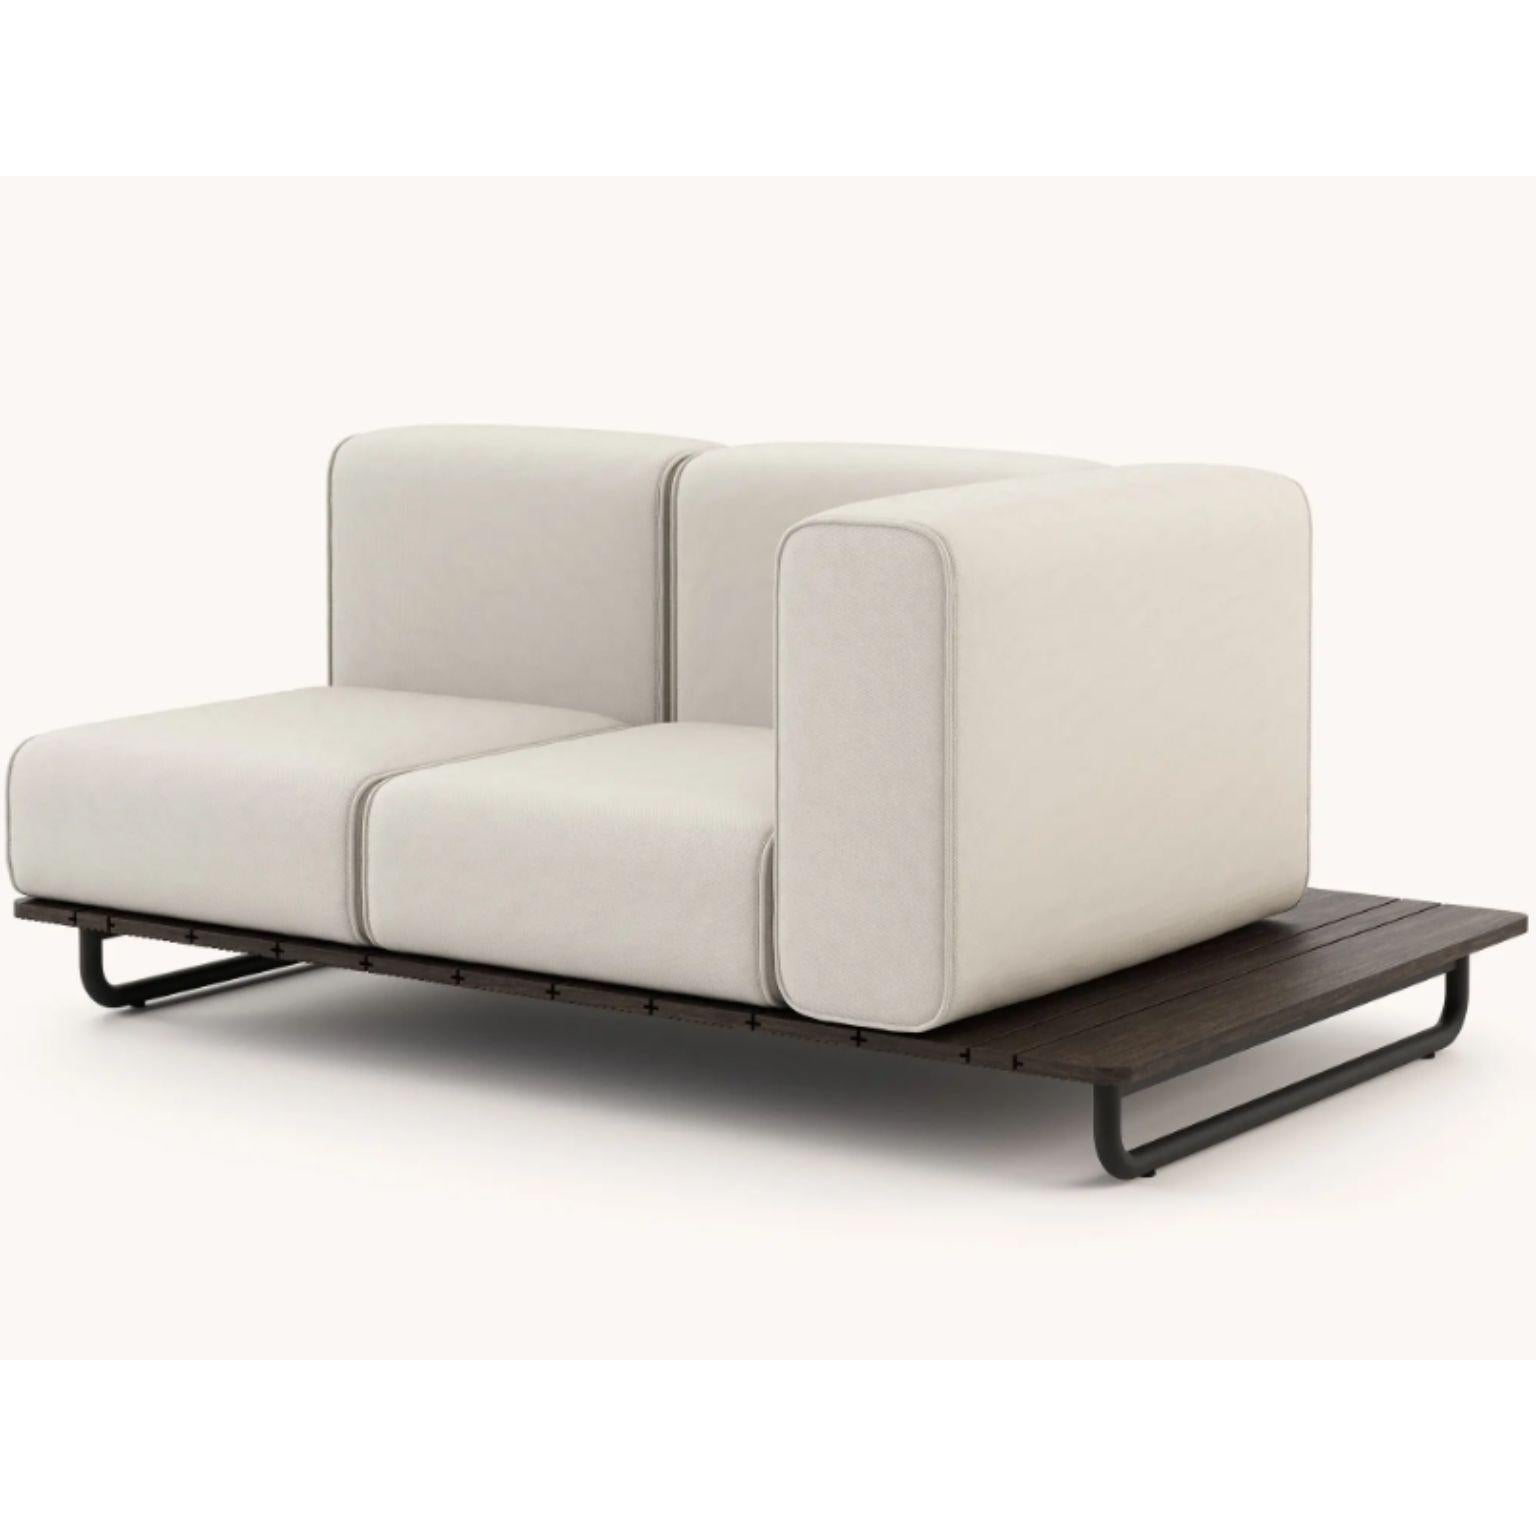 Other Copacabana Sofa Without Armrest by Domkapa For Sale